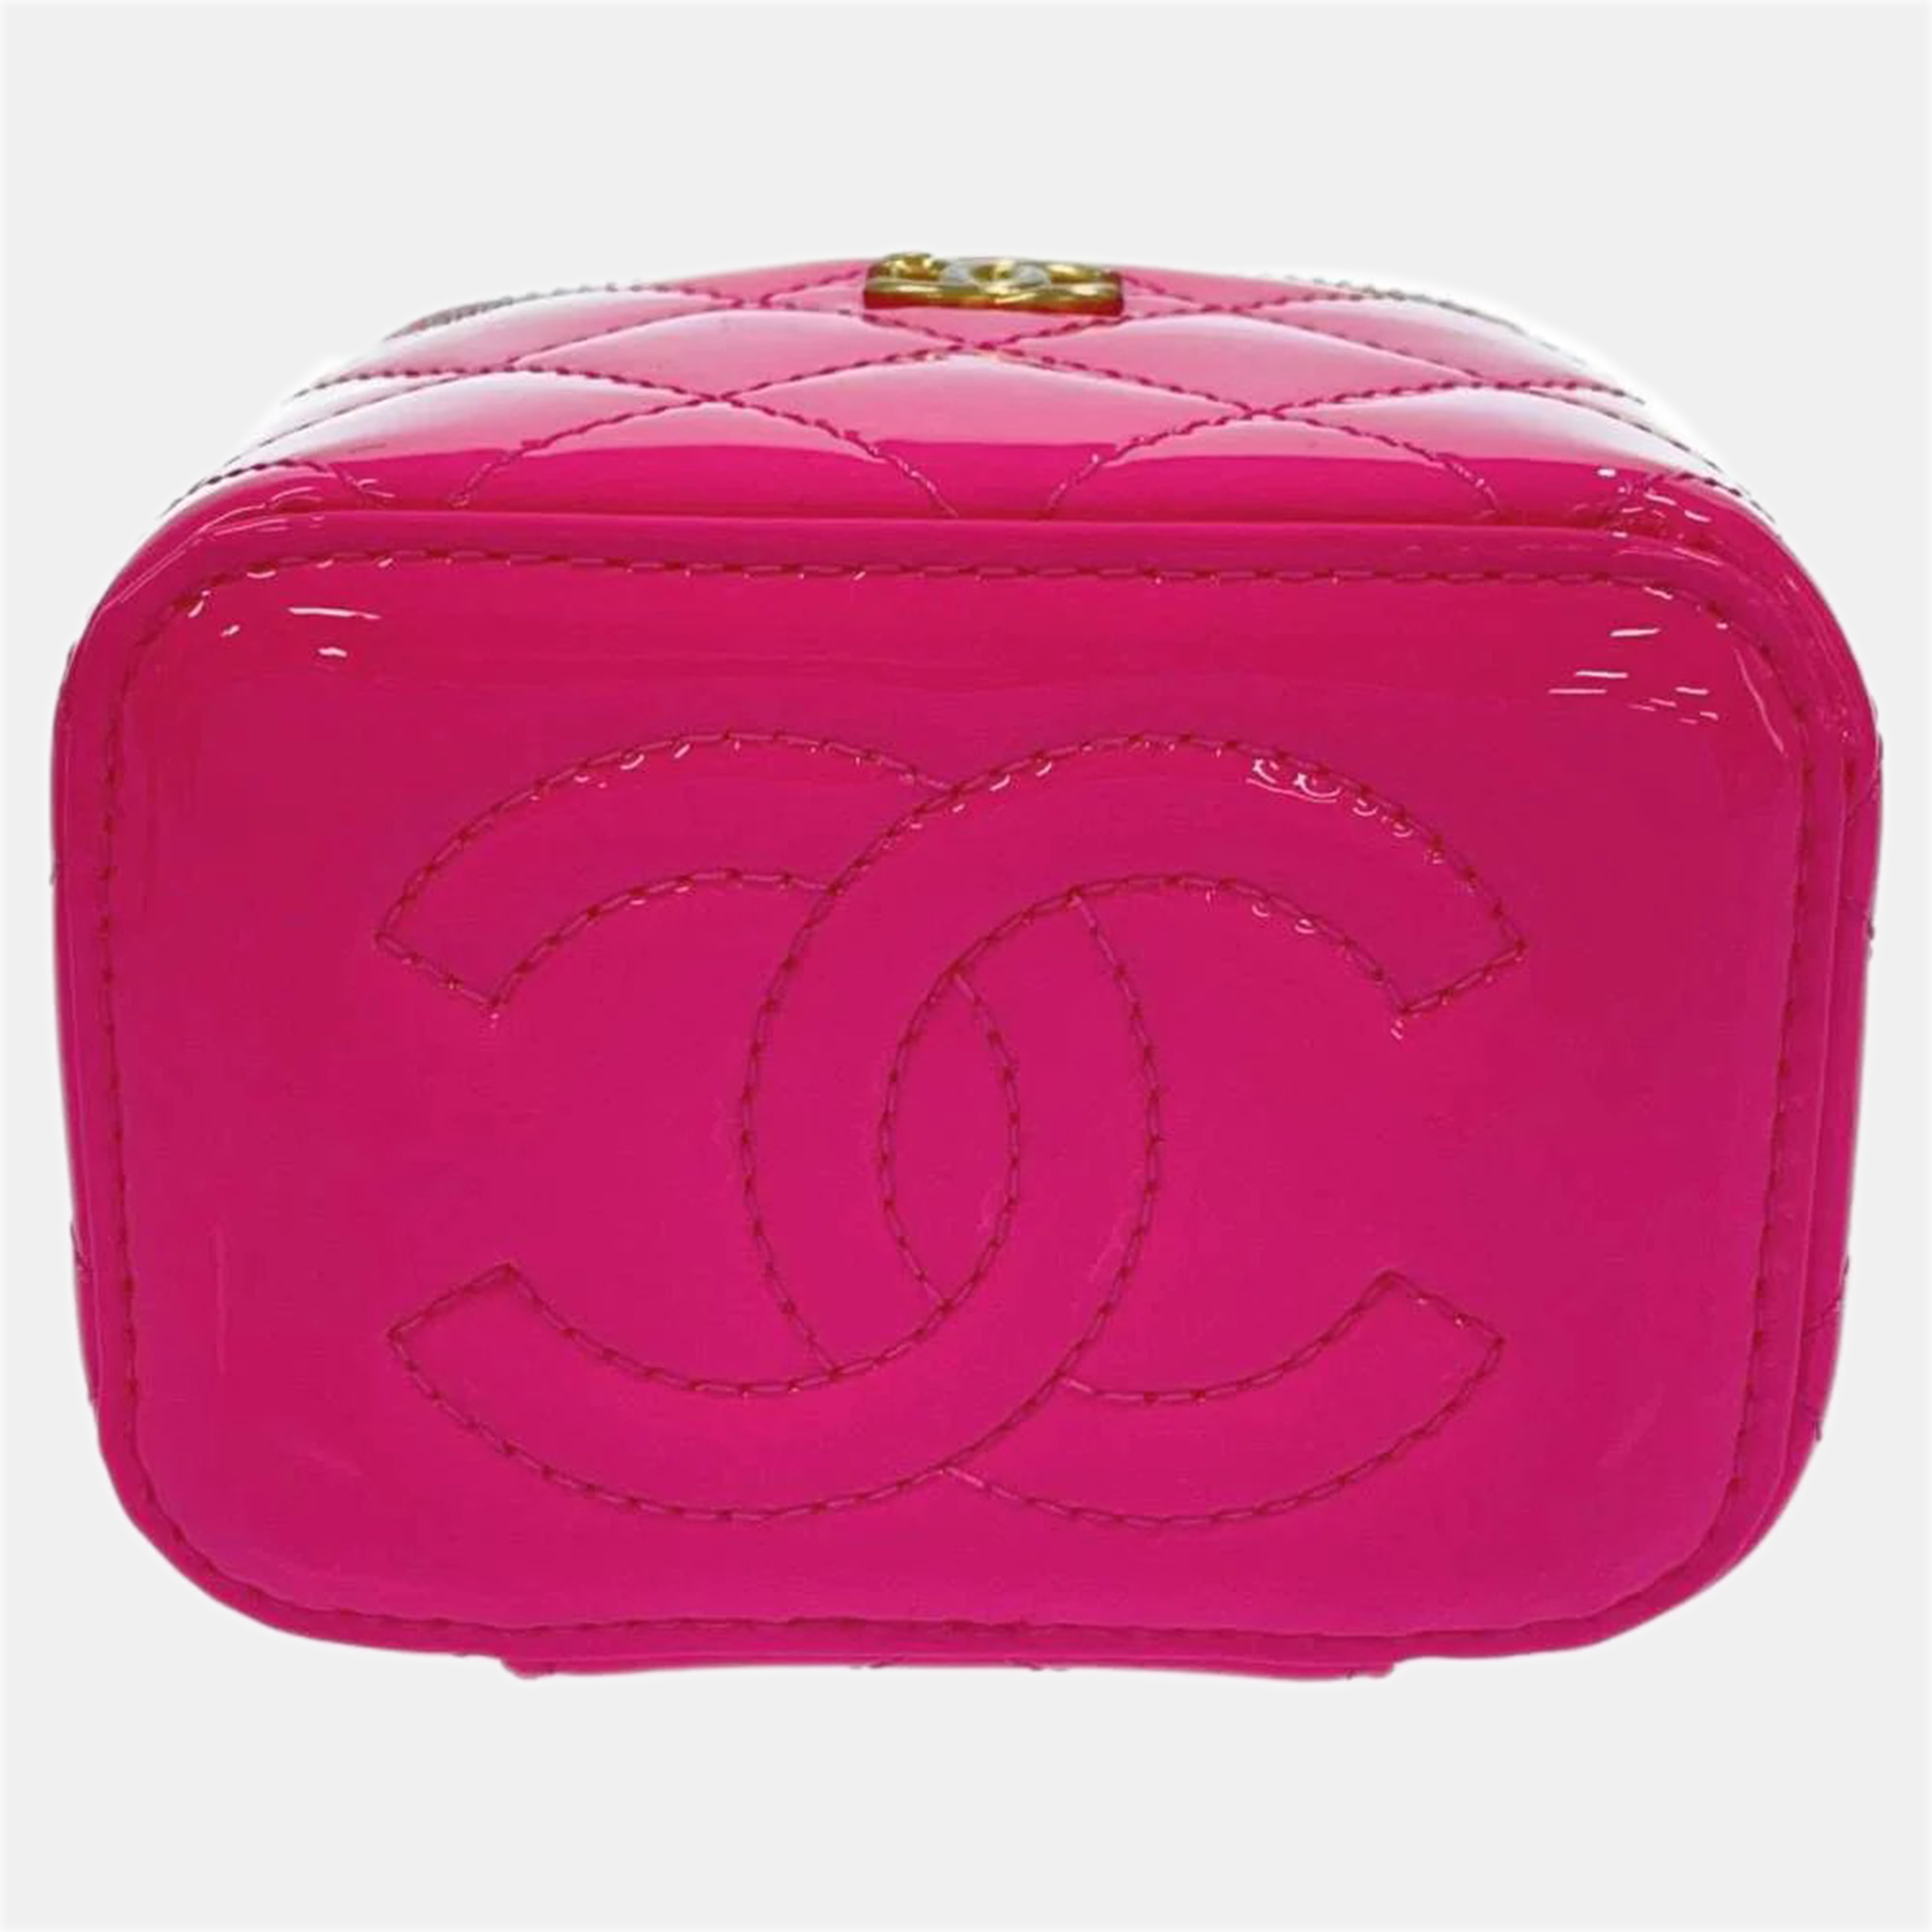 Chanel Pink Patent Leather Vanity Bag